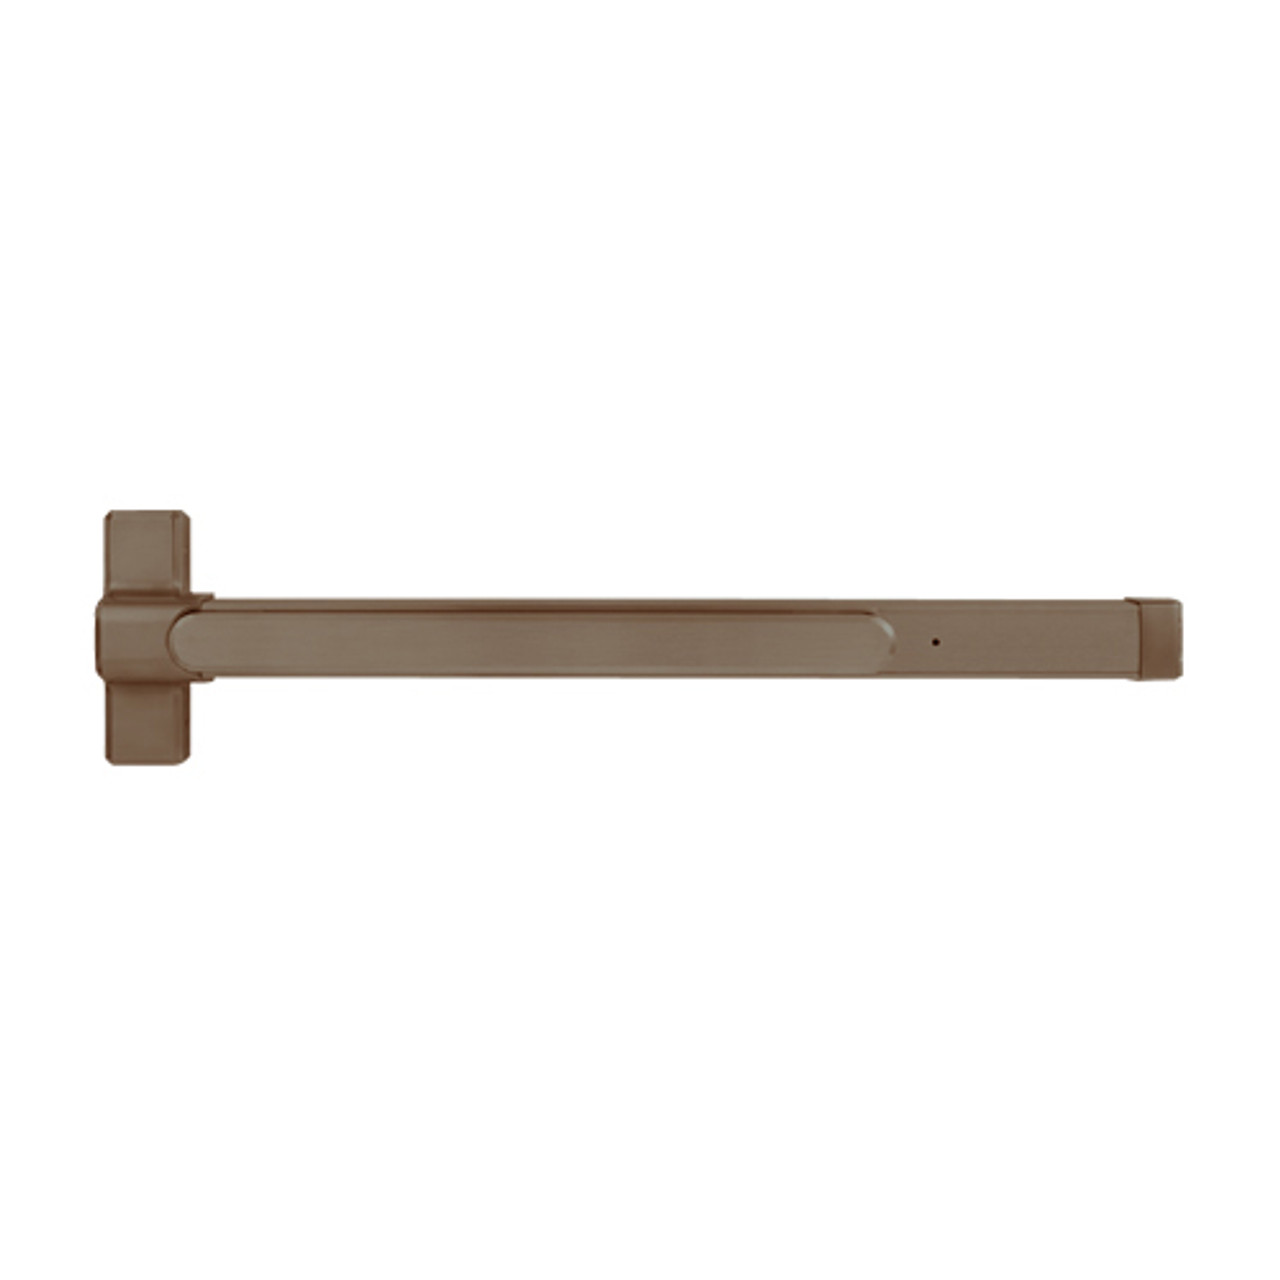 QED119LRX-48-8-313AN Stanley QED100 Series Heavy Duty Surface Vertical Rod Fire Rated Exit Device in Anodized Duranodic Bronze Finish